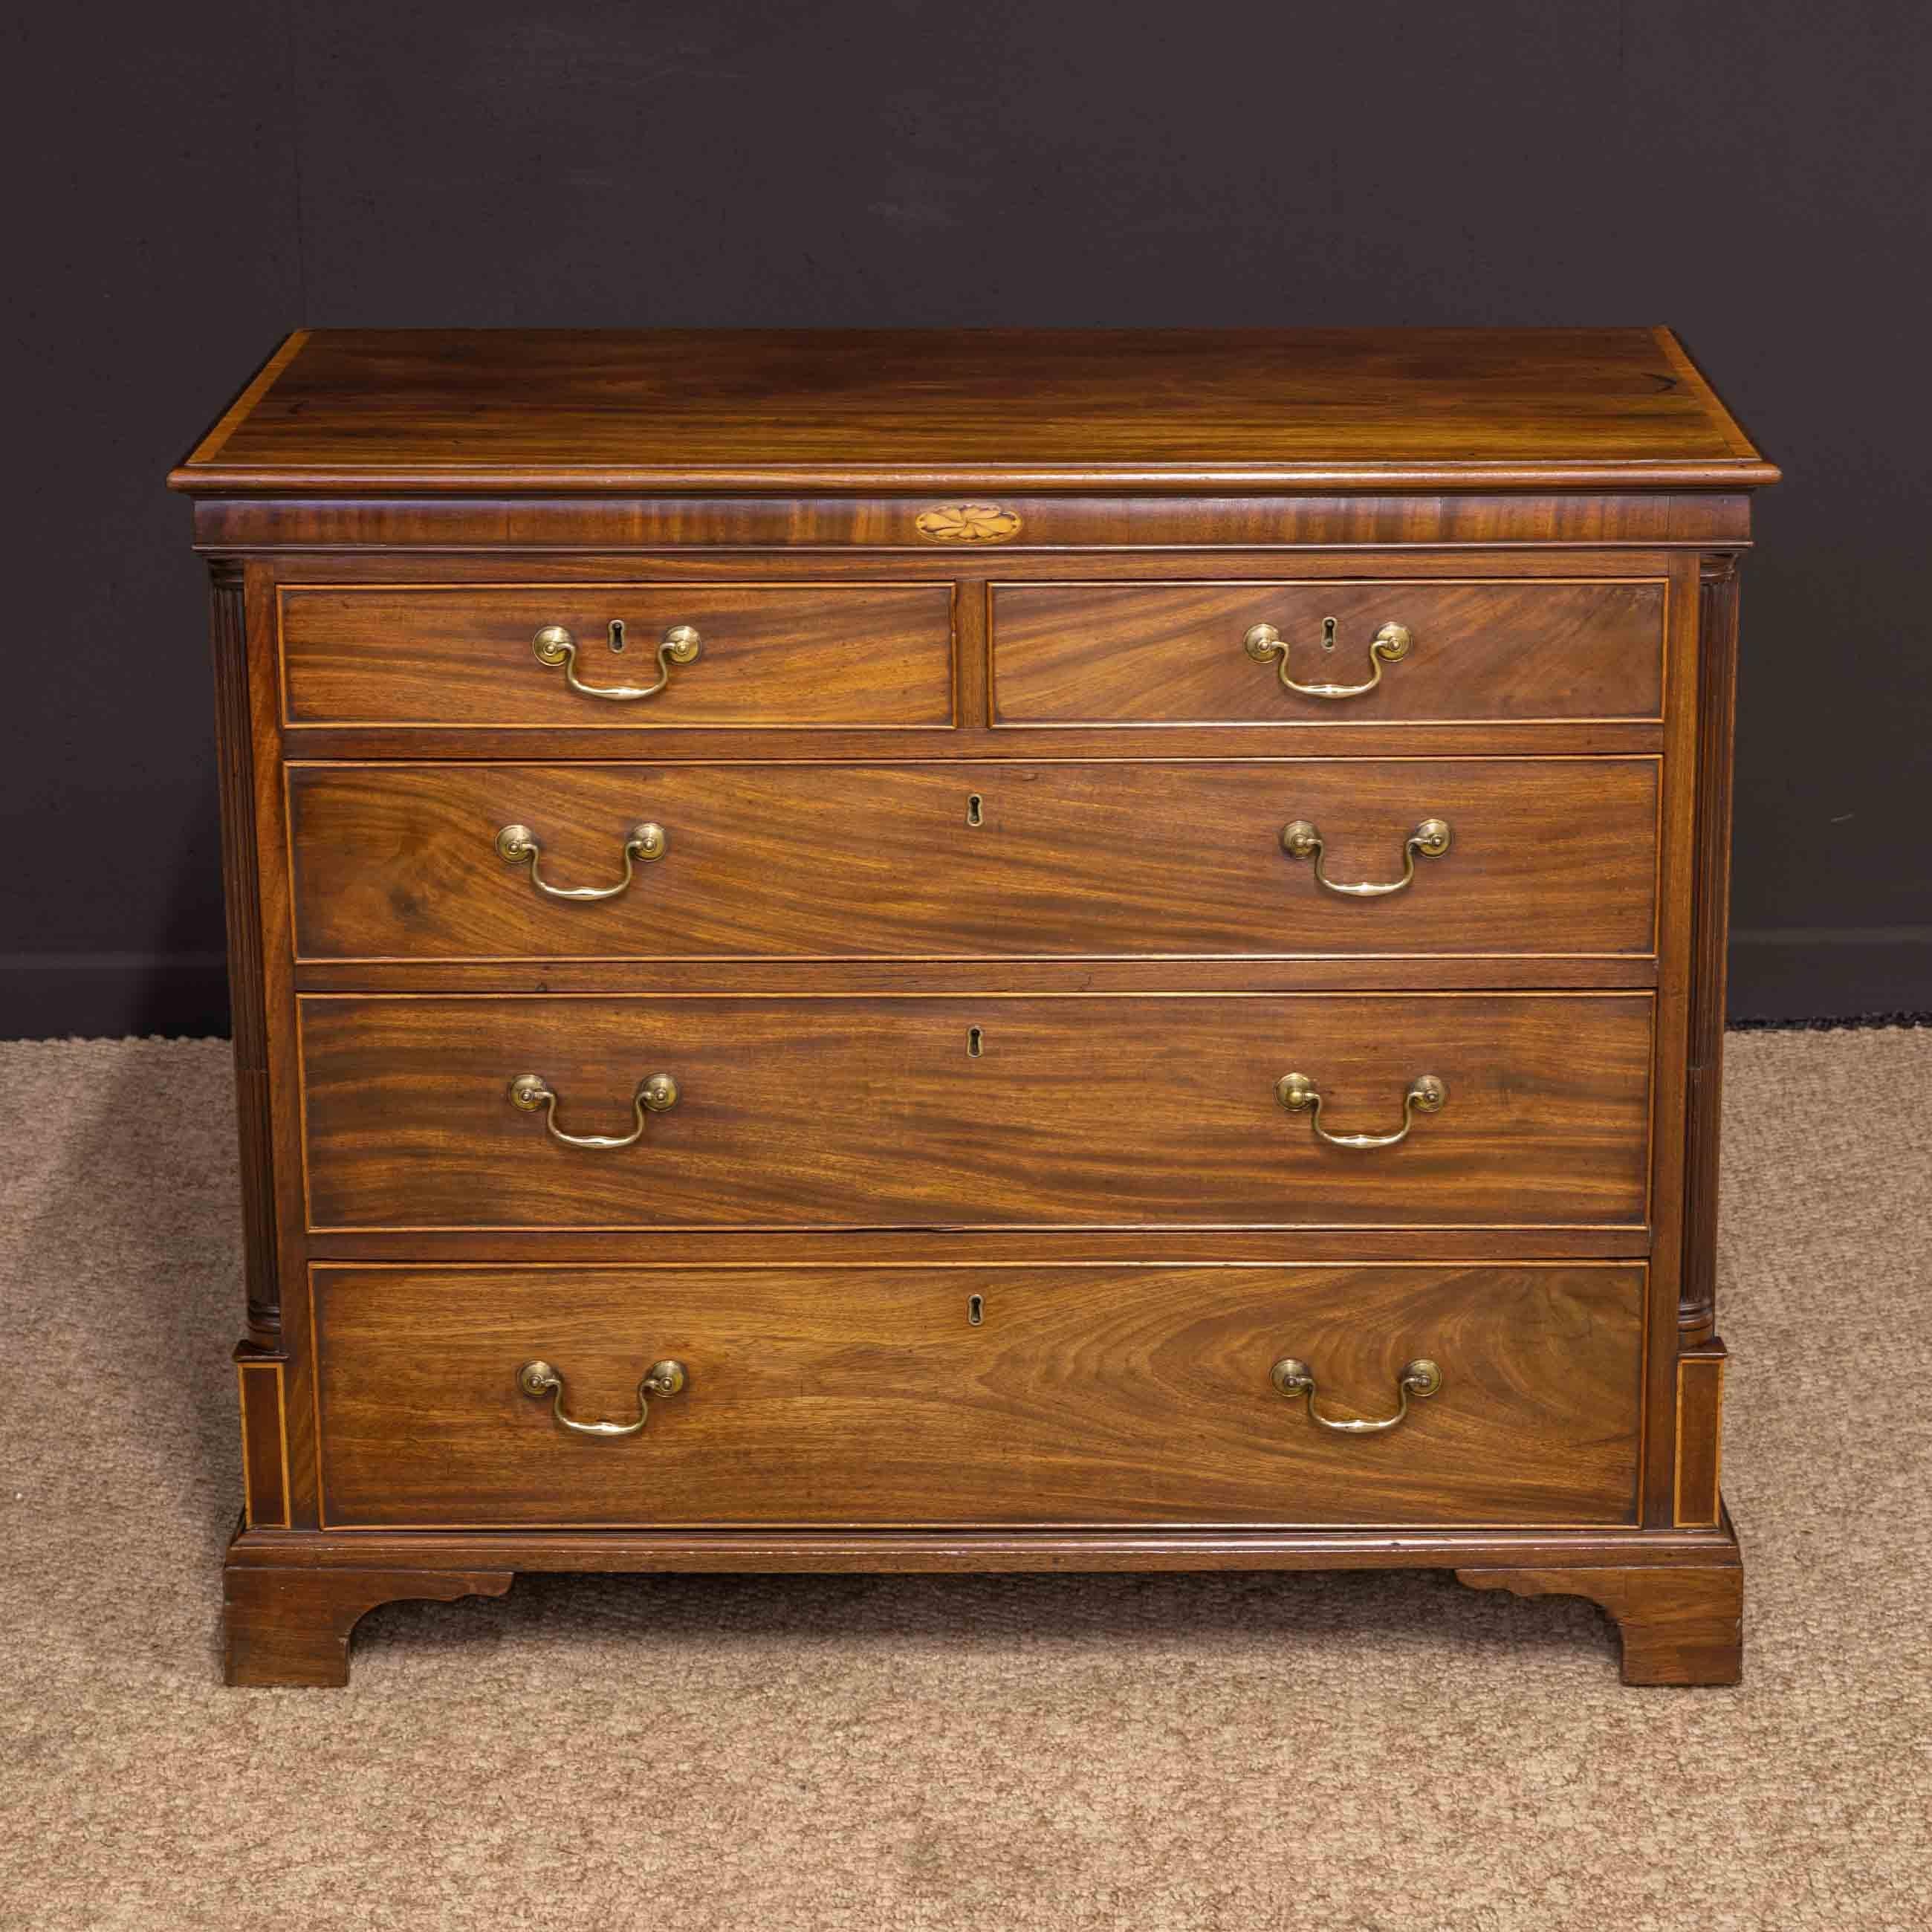 A very attractive small Georgian mahogany chest with pine lined drawers and back. The top is crossbanded in fruitwood and gives way to an unusual frieze that has been made with a slight bow. The centre of the table has a delightful inlaid cartouche